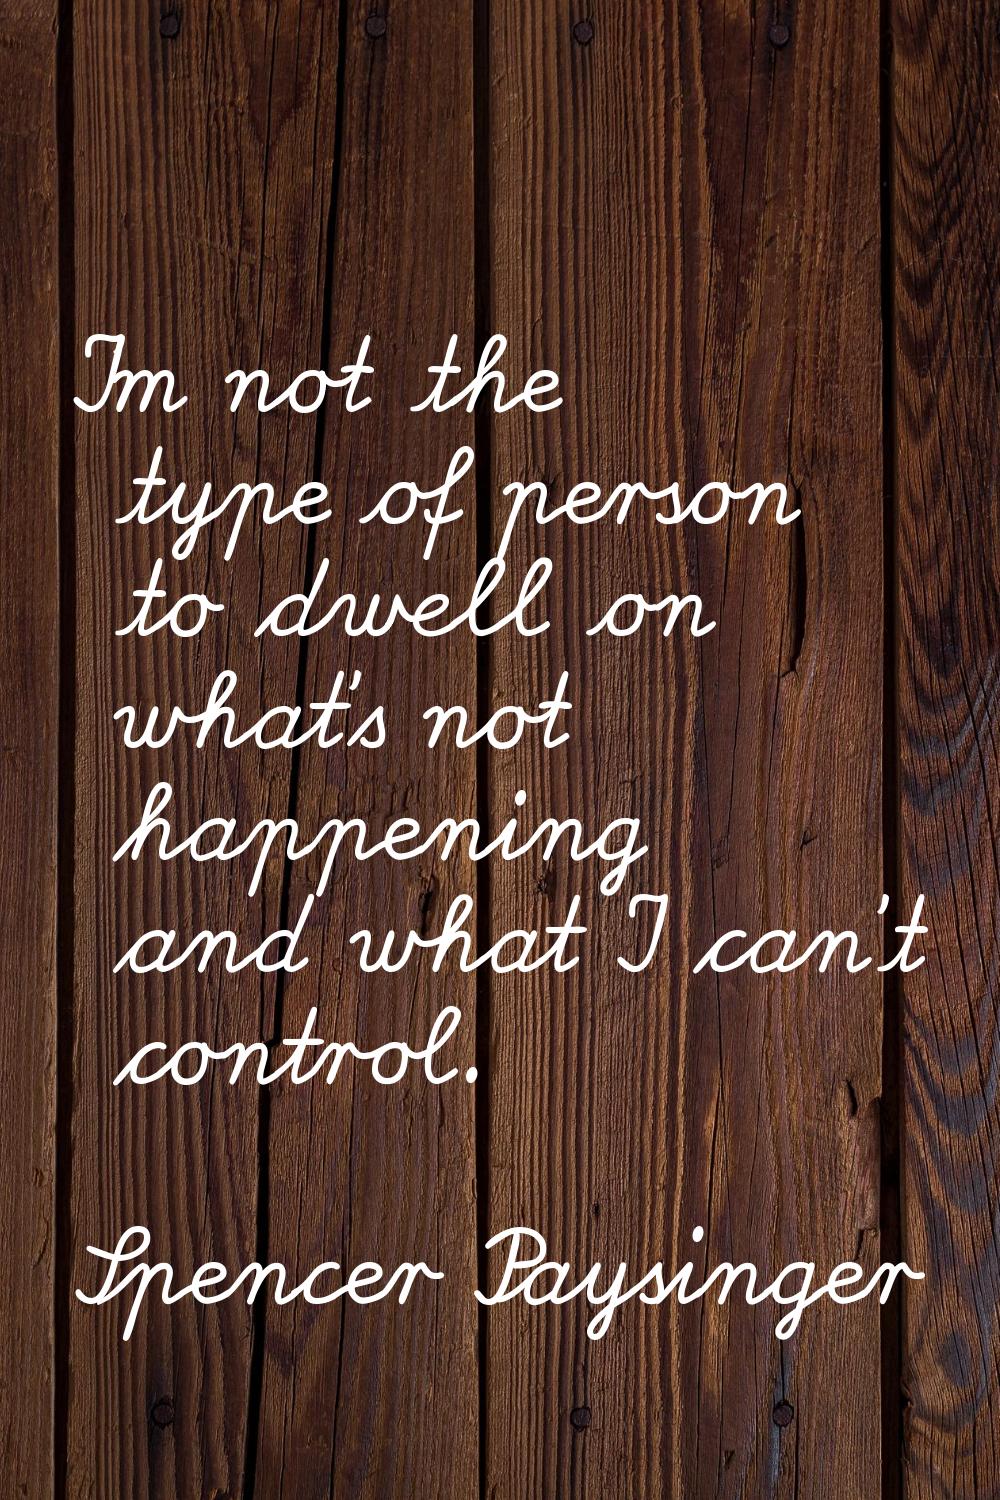 I'm not the type of person to dwell on what's not happening and what I can't control.